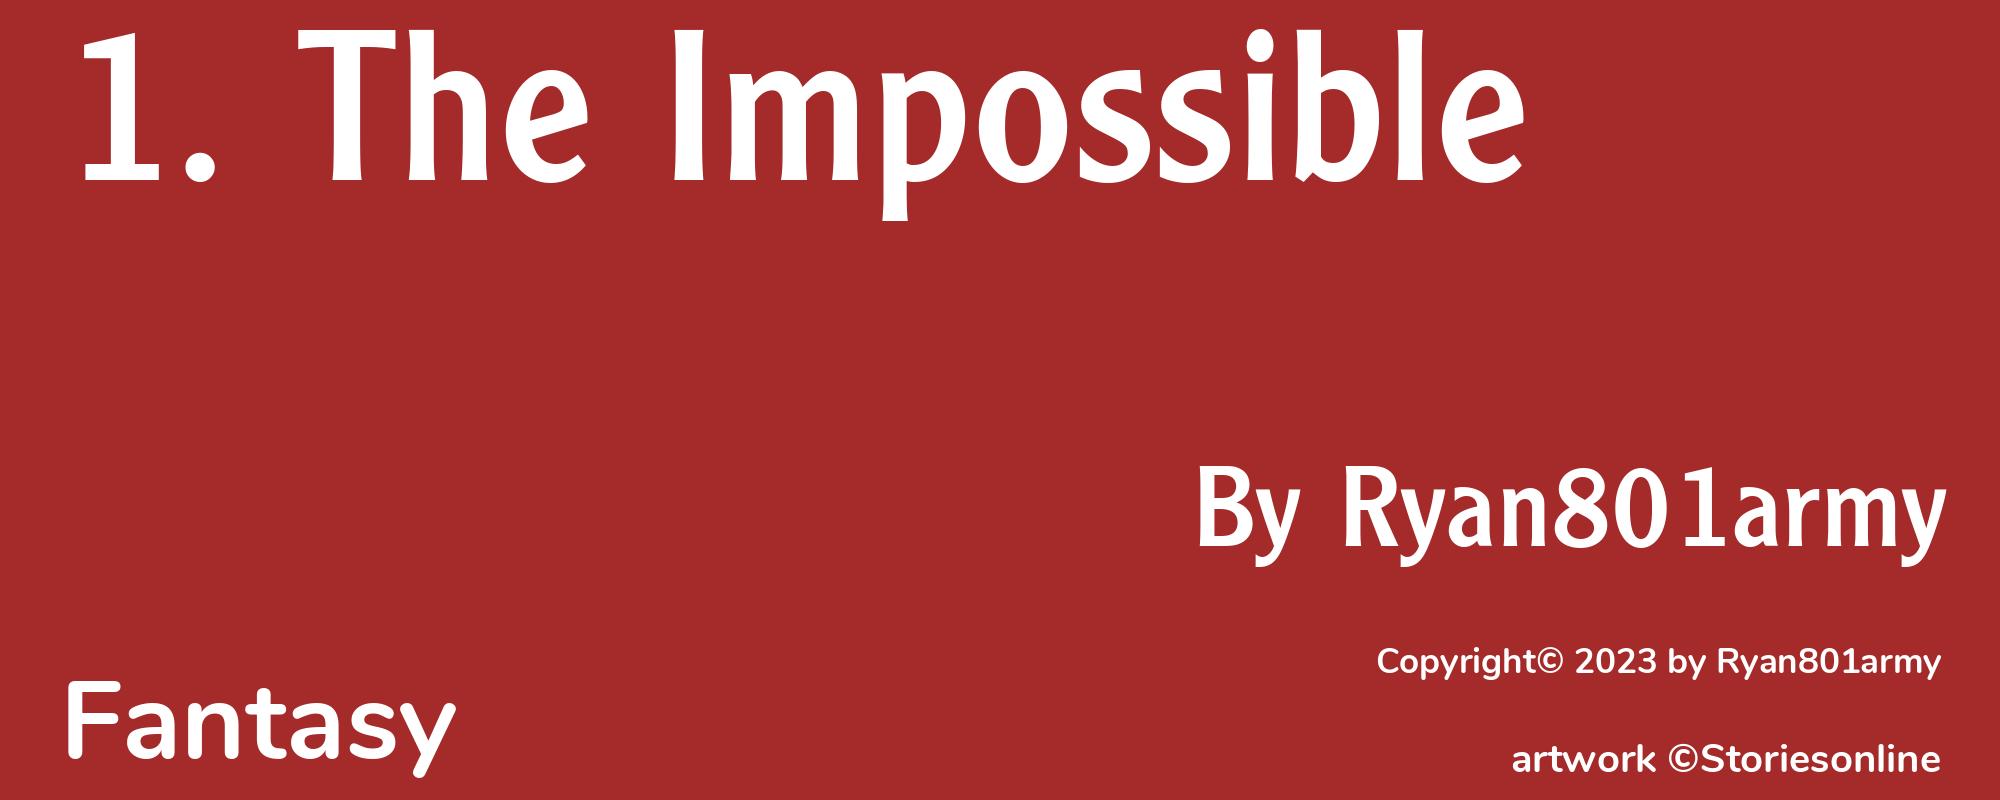 1. The Impossible - Cover